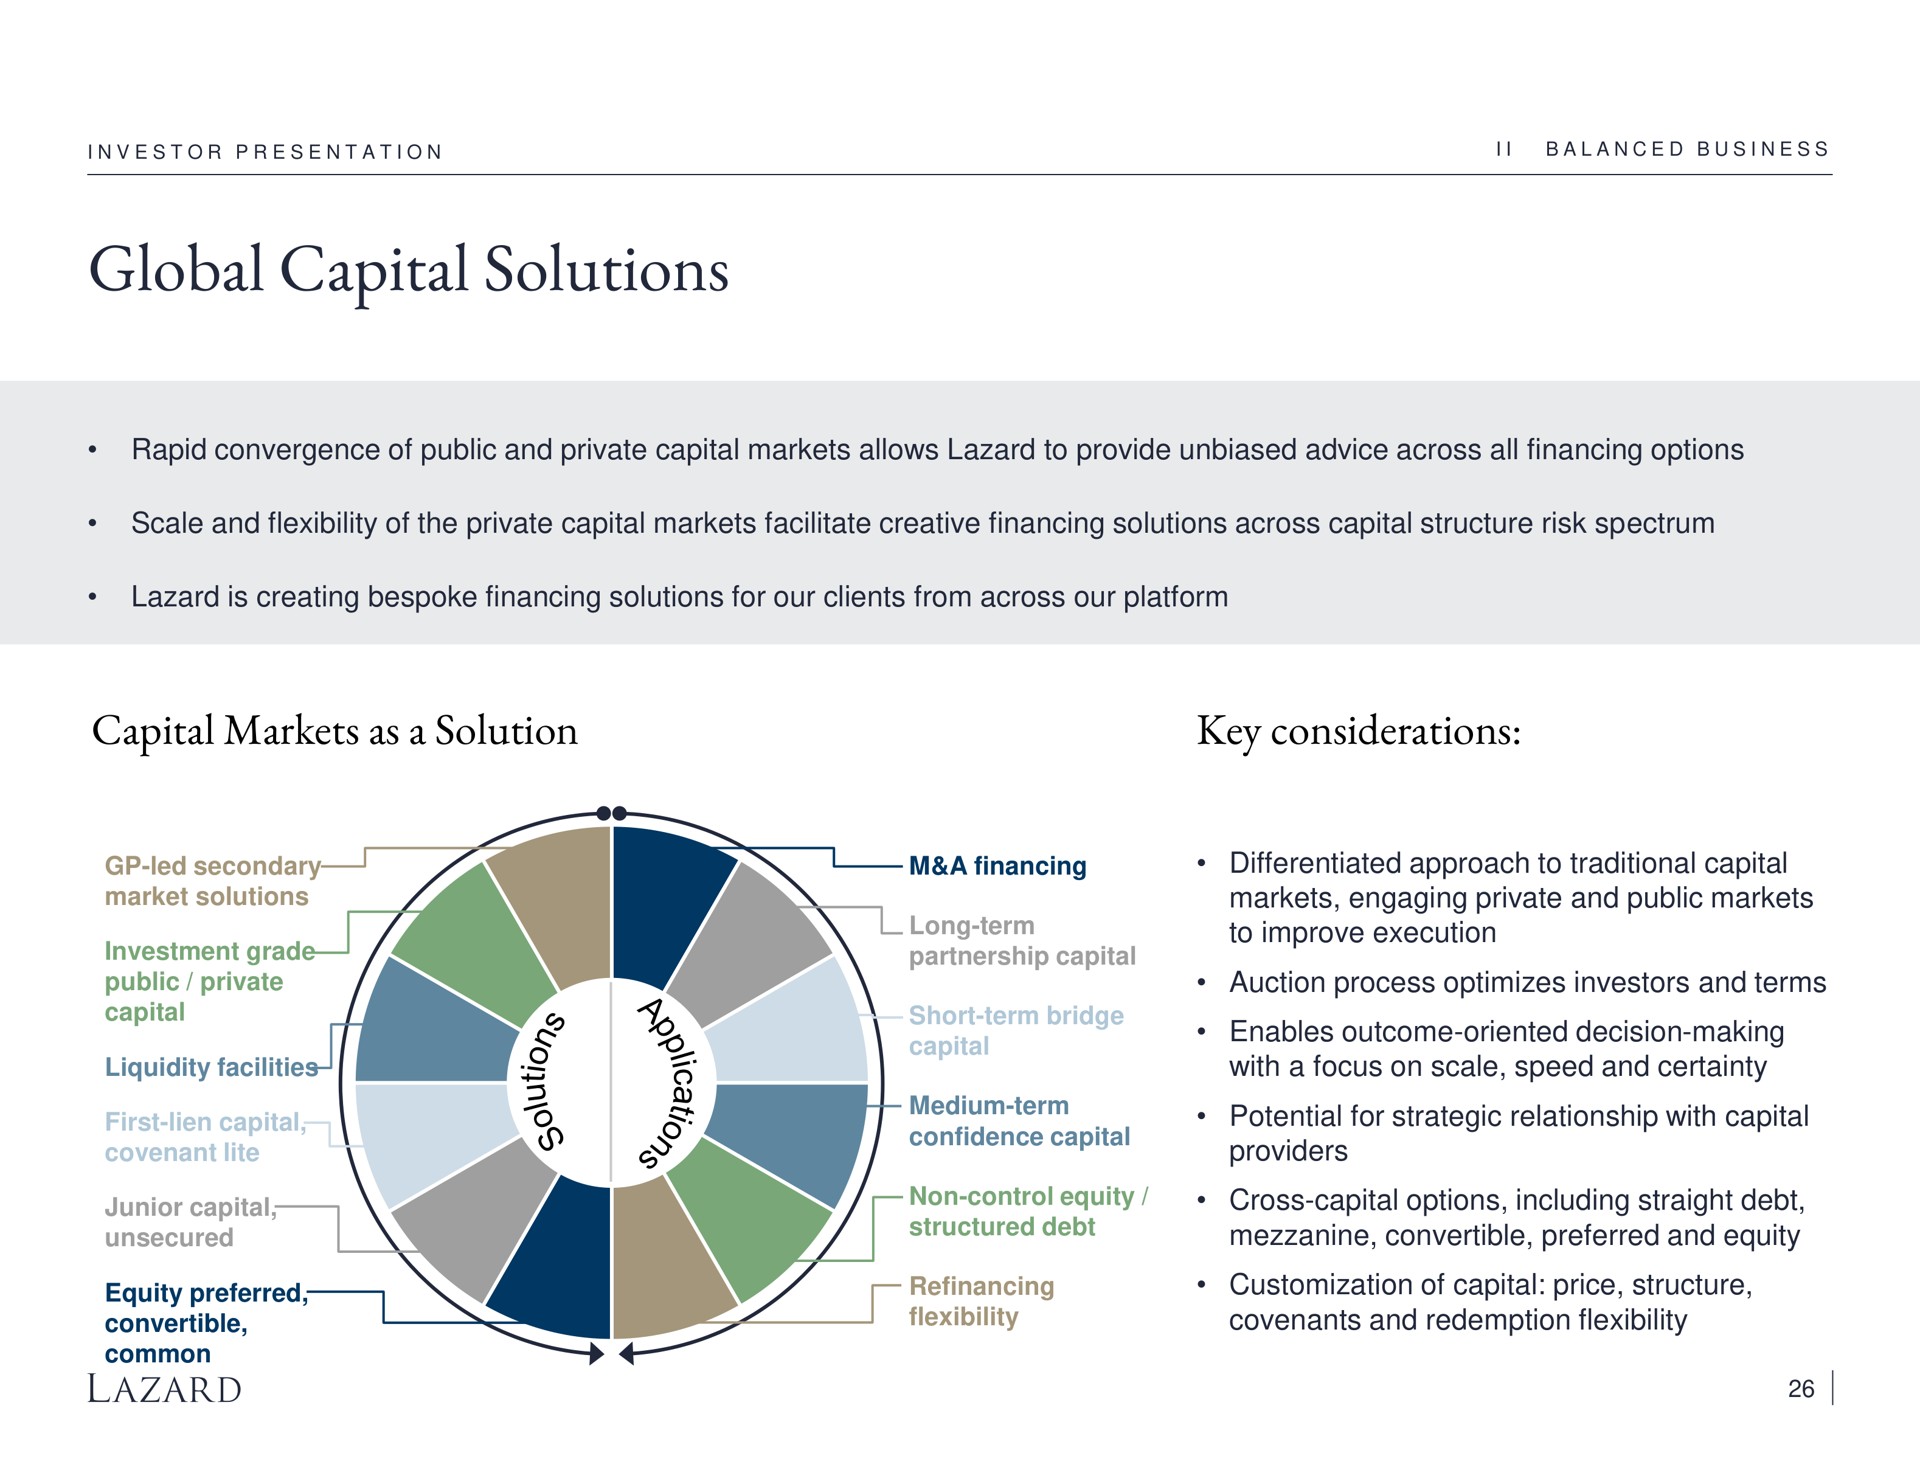 global capital solutions capital markets as a solution key considerations | Lazard